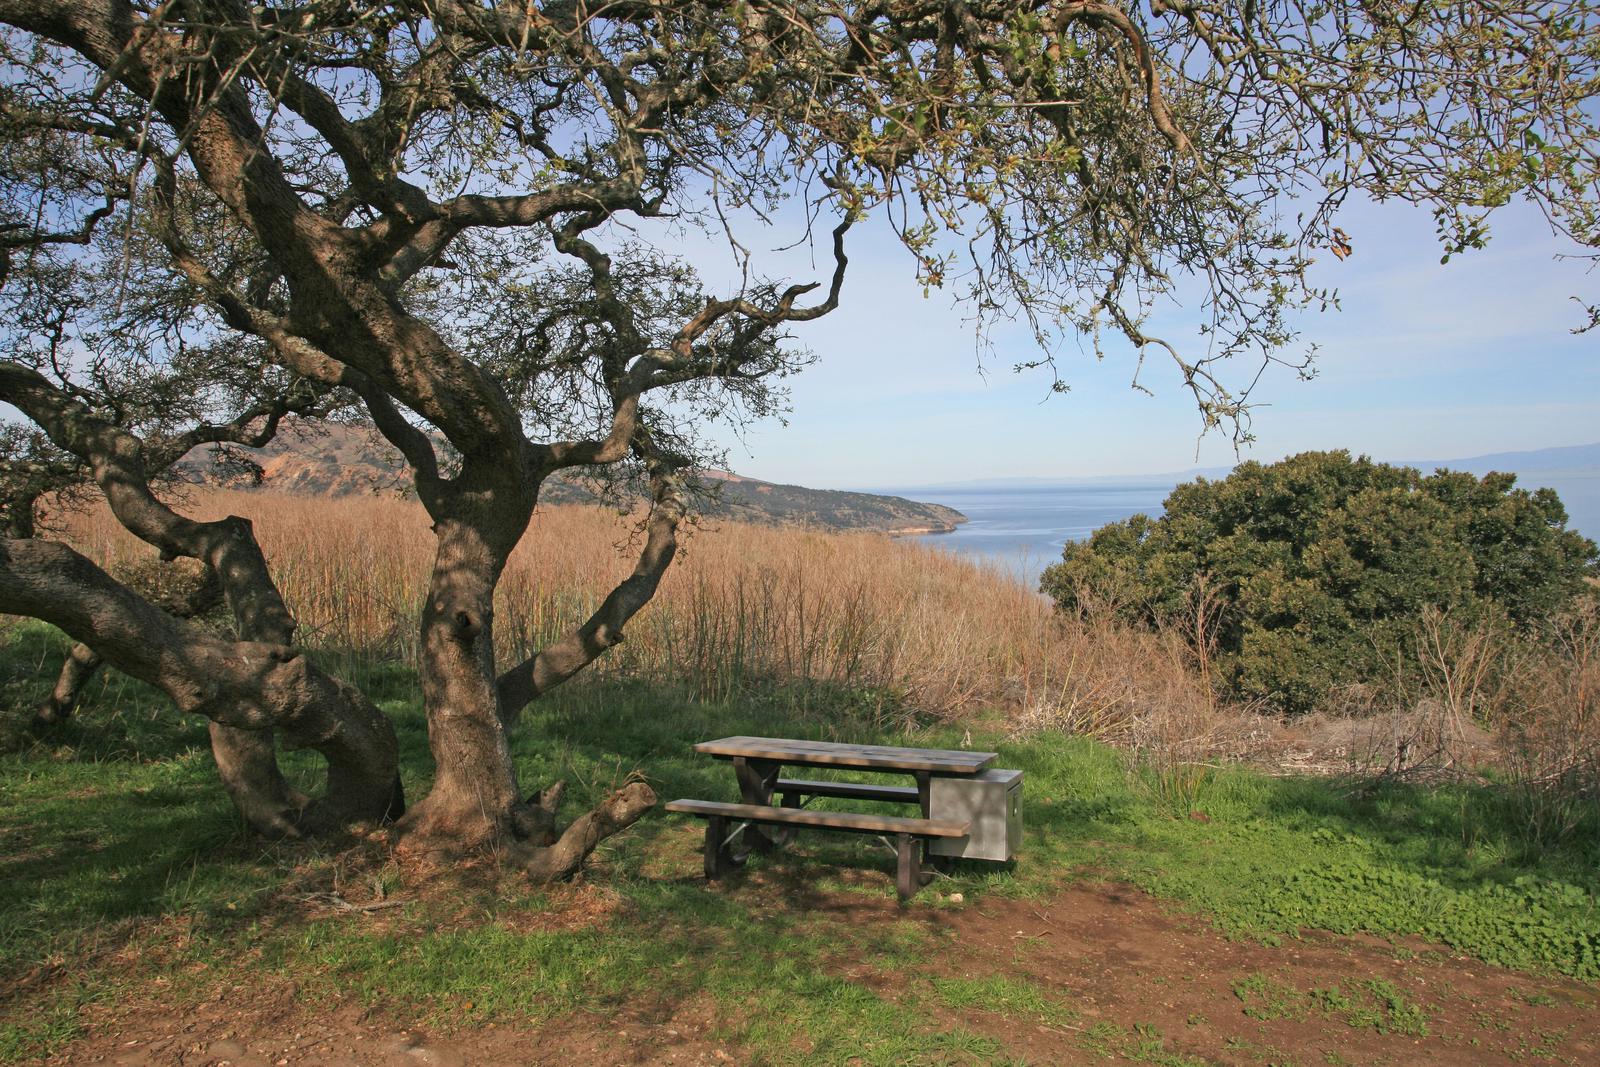 Picnic table next to large oak tree overlooking ocean.  BACKCOUNTRY AREA - 001
